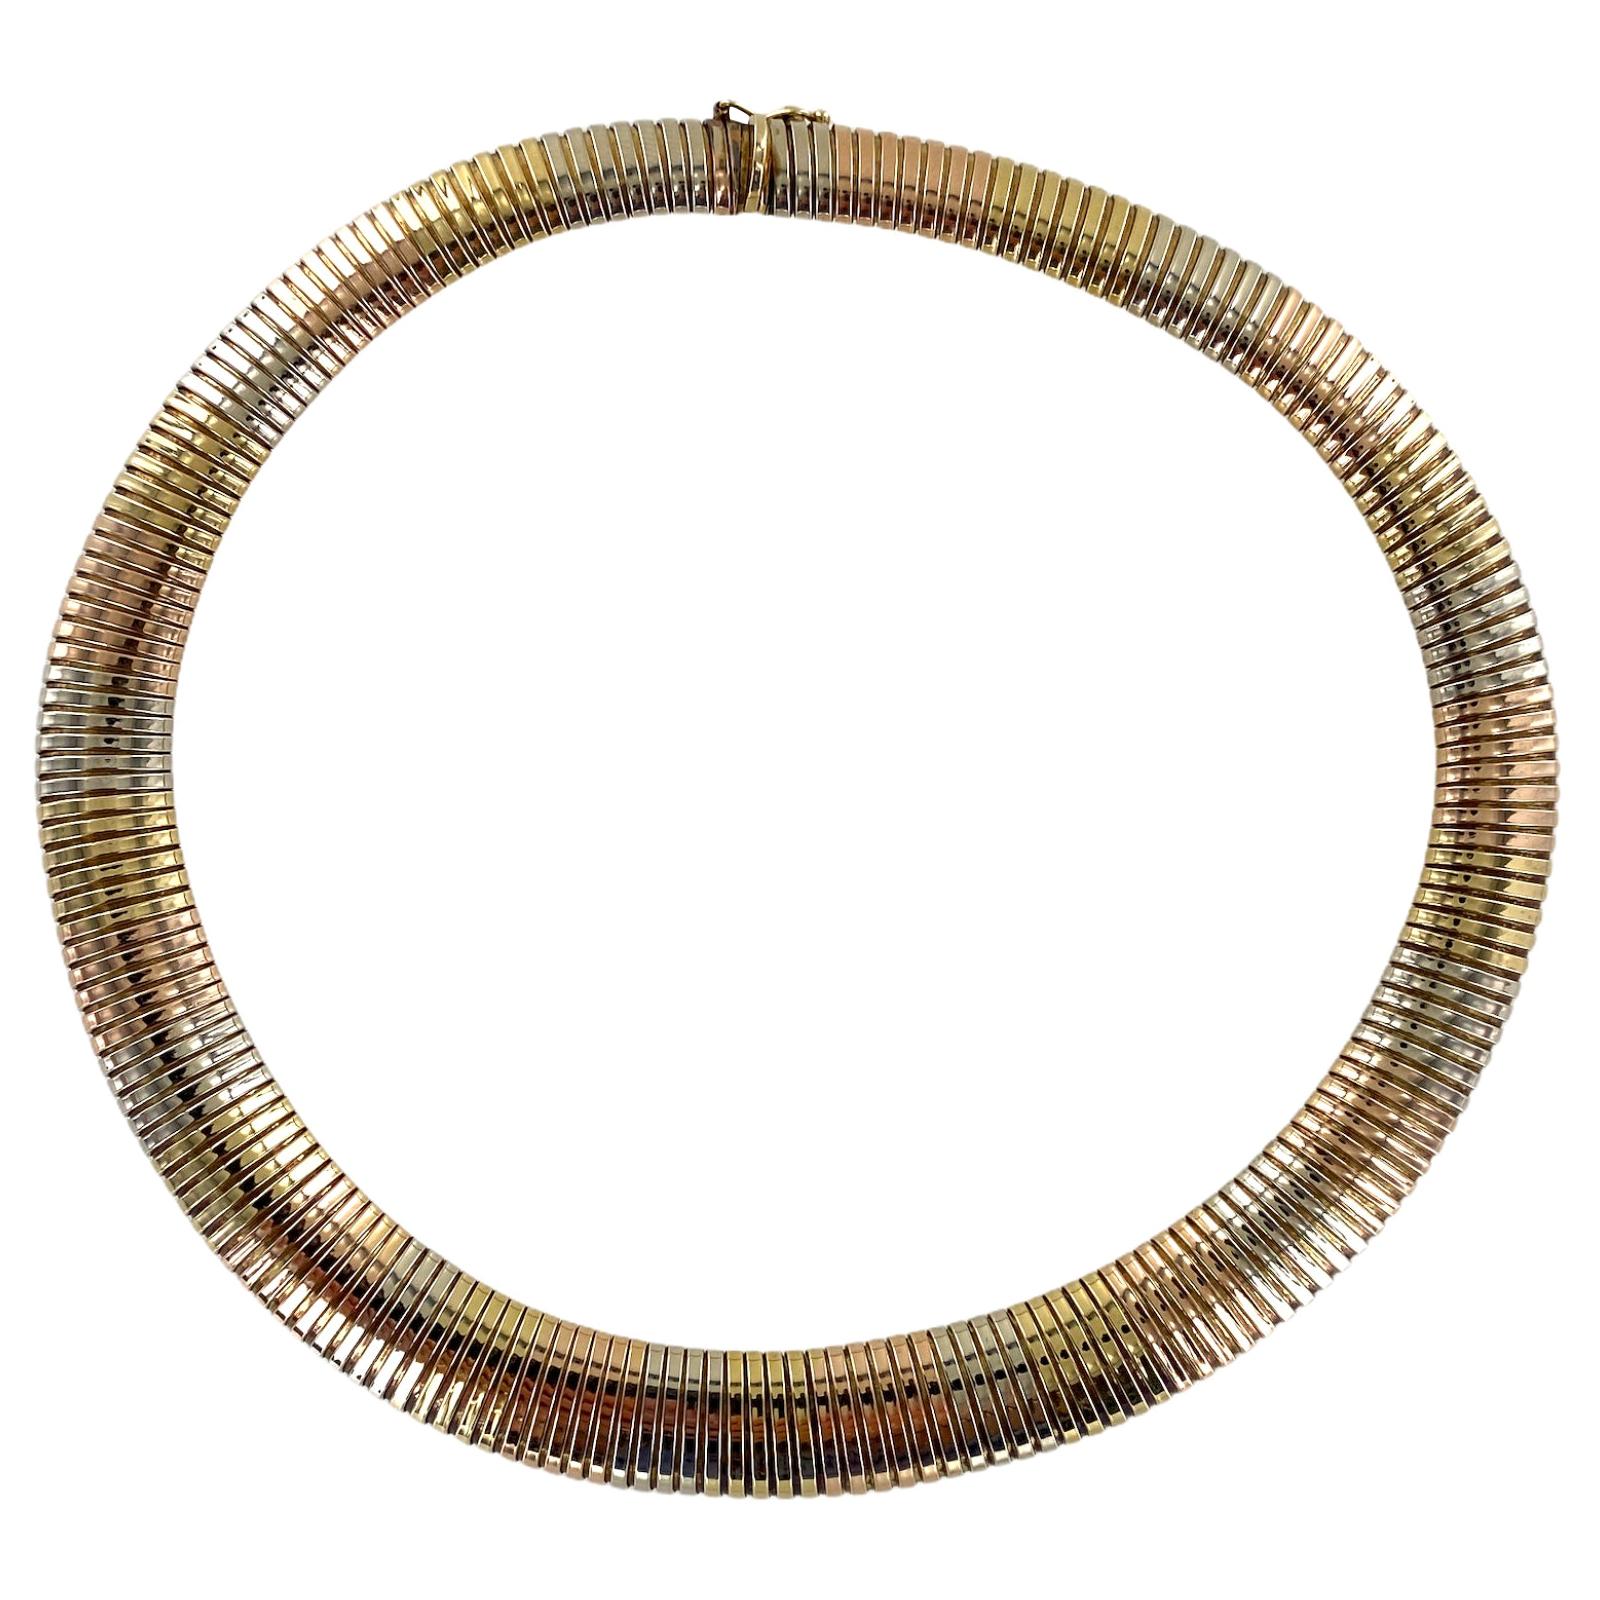 1960s Italian Tri-Color Gold Tapered Tubegas Choker Vintage Necklace